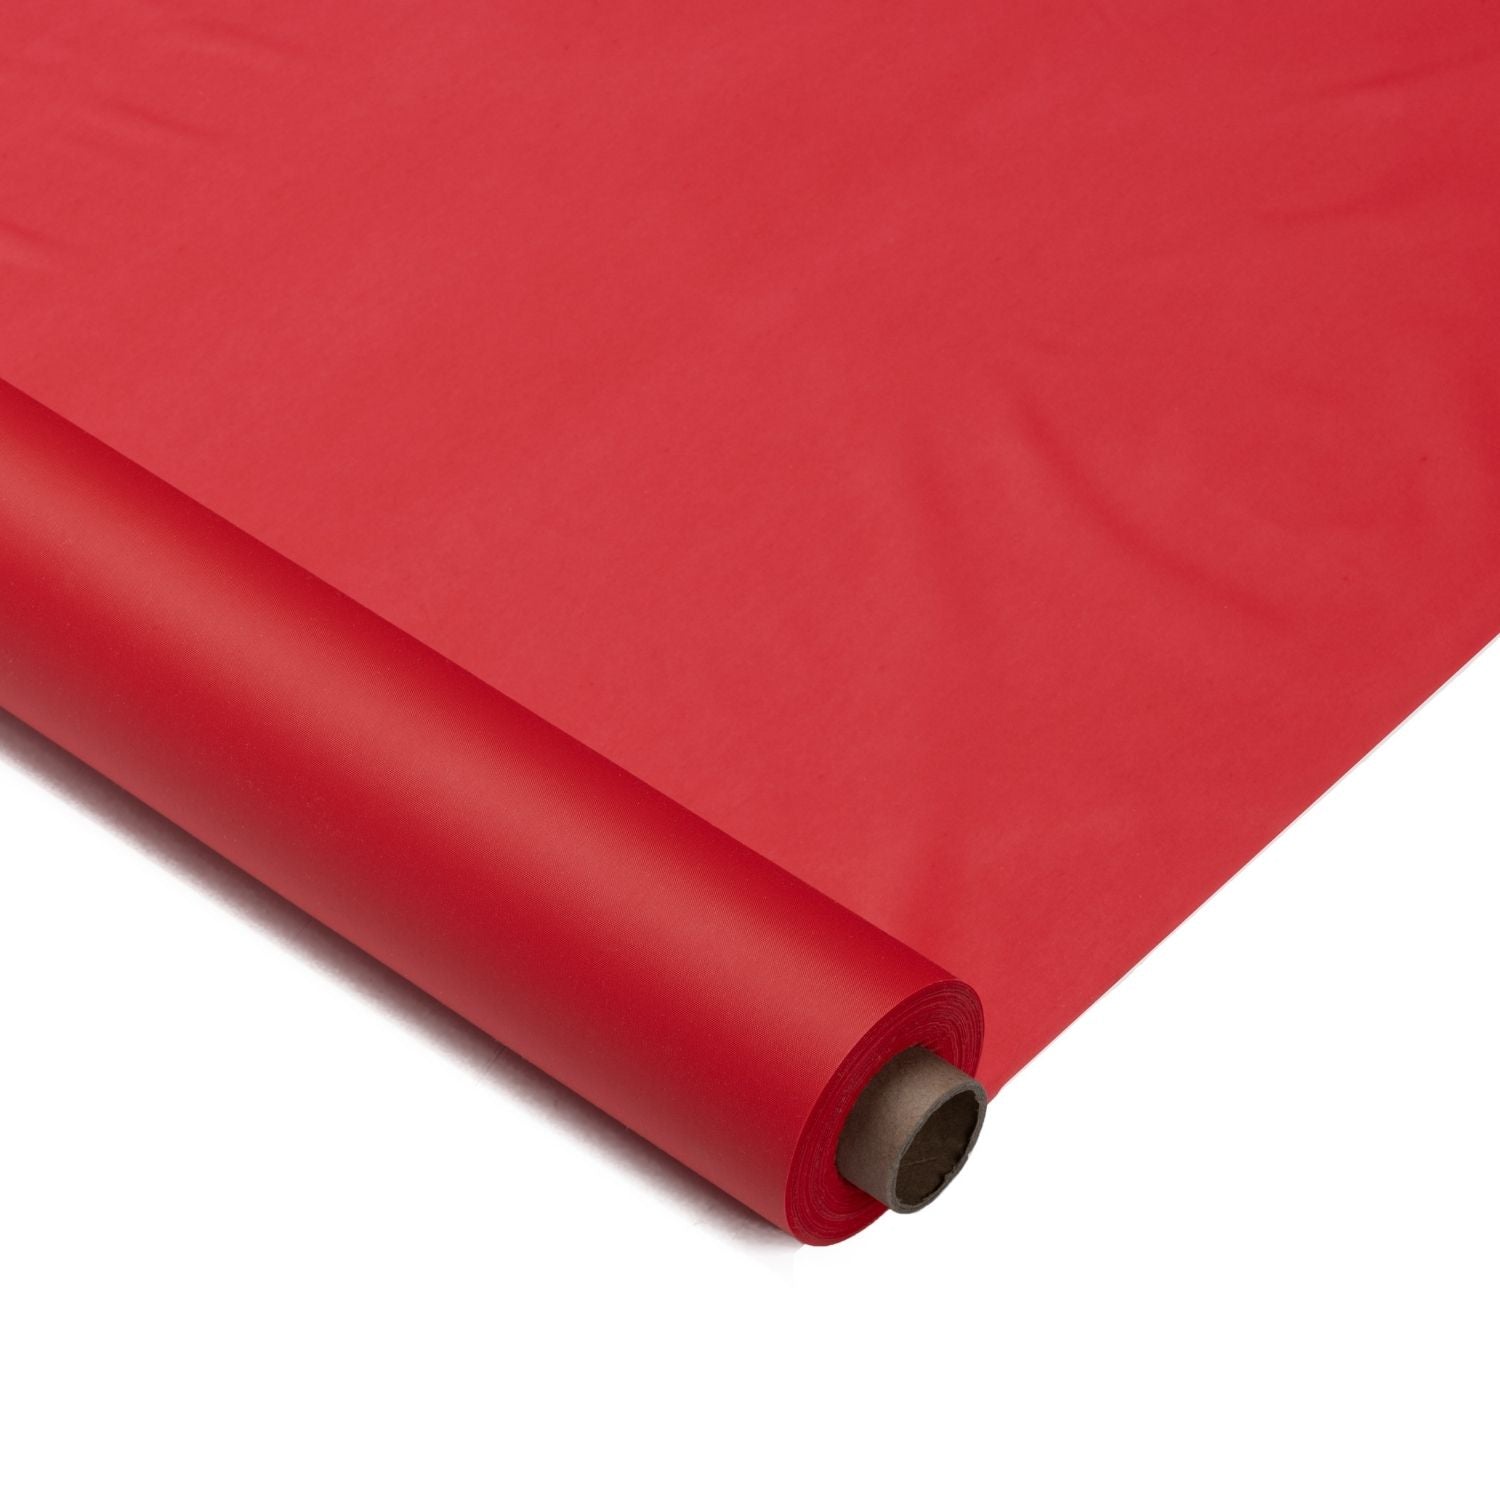 40 In. X 100 Ft. Premium Red Plastic Table Roll | 6 Pack